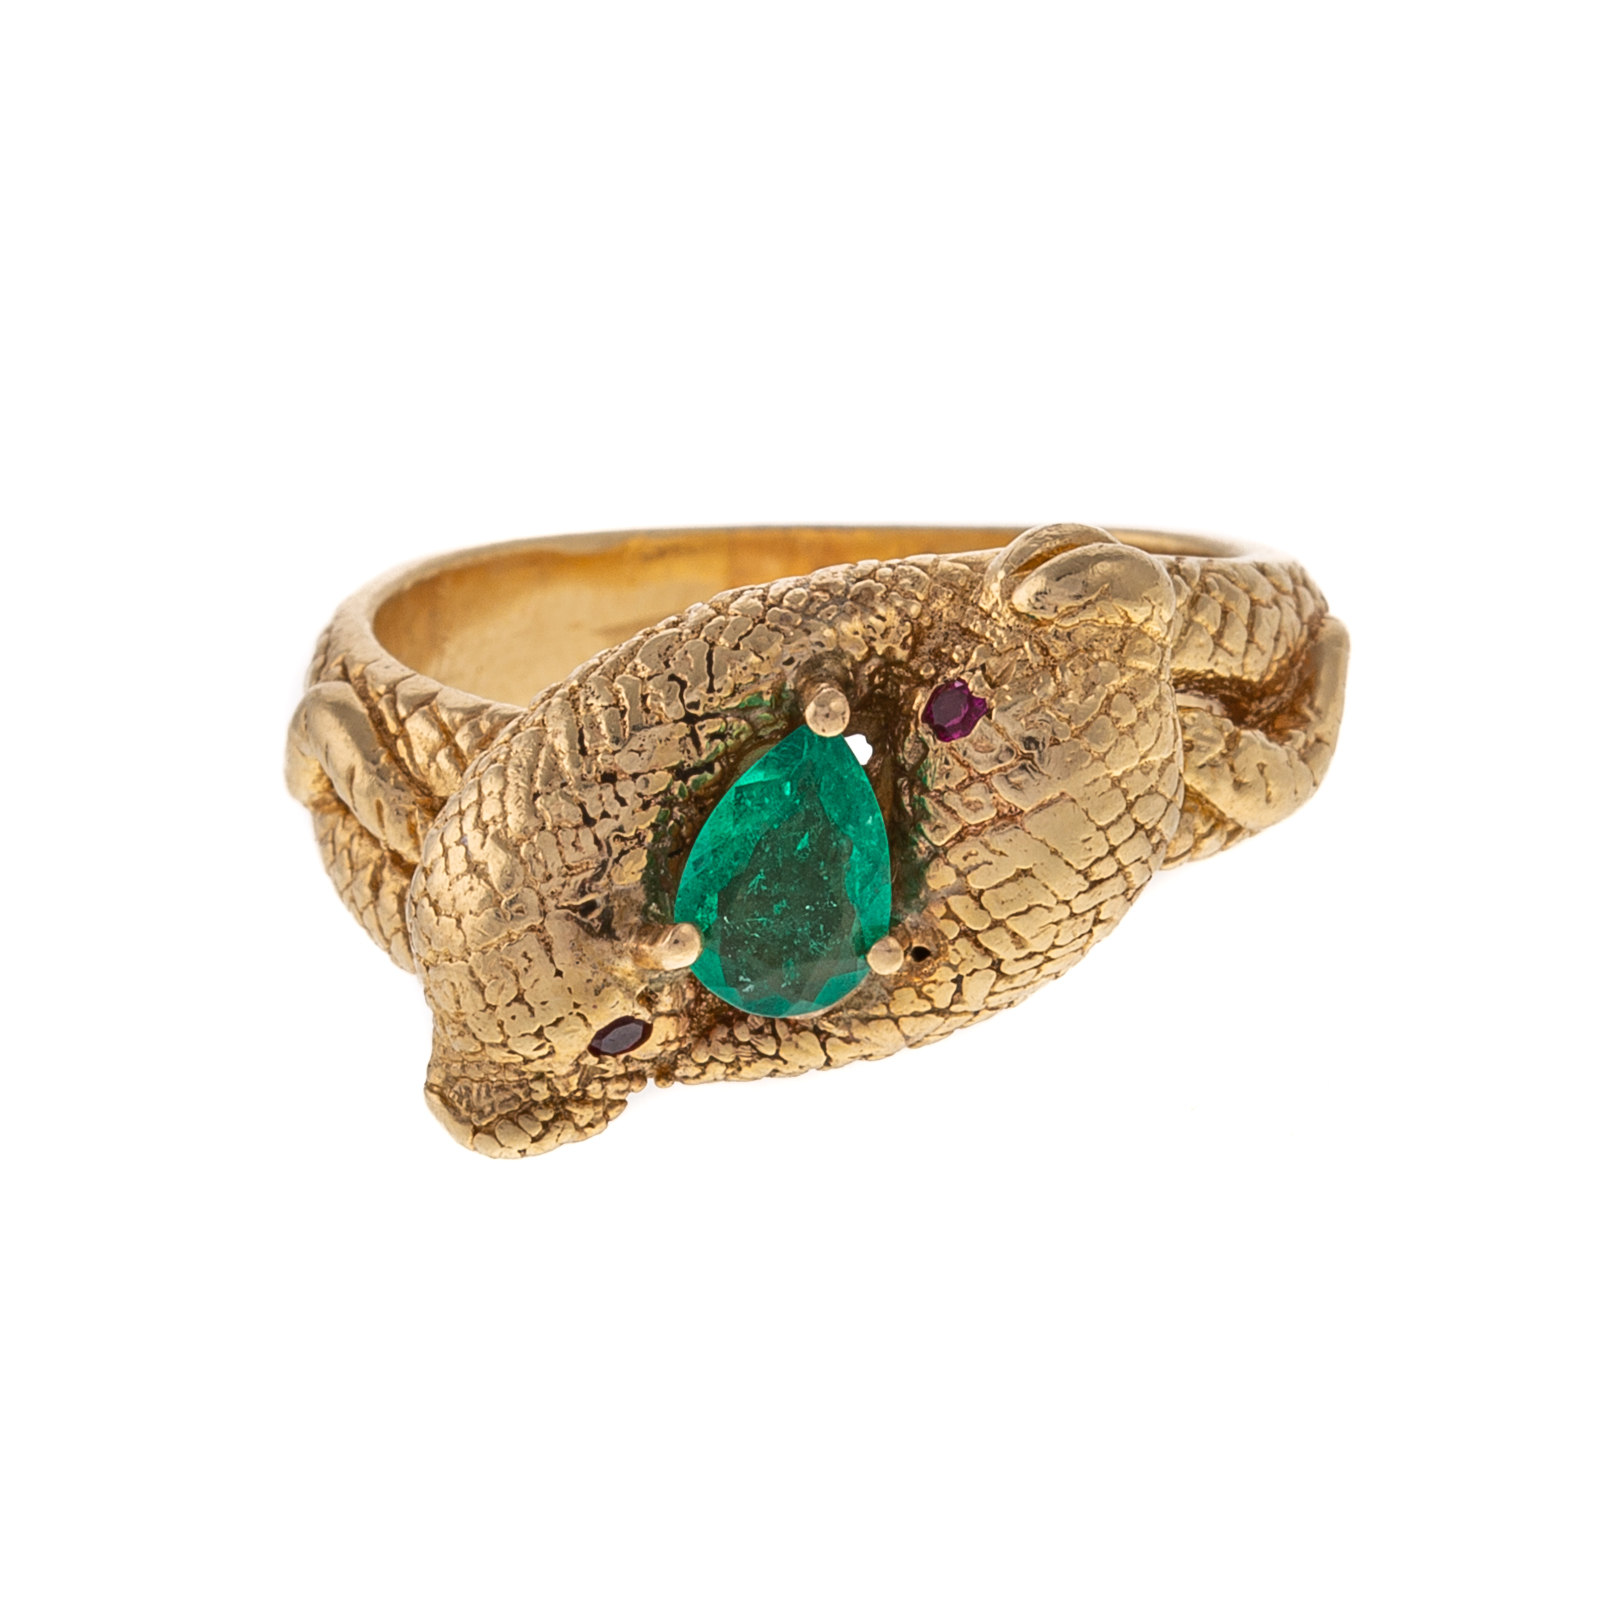 A 14K DOUBLE SNAKE RING WITH EMERALD 29dfc9